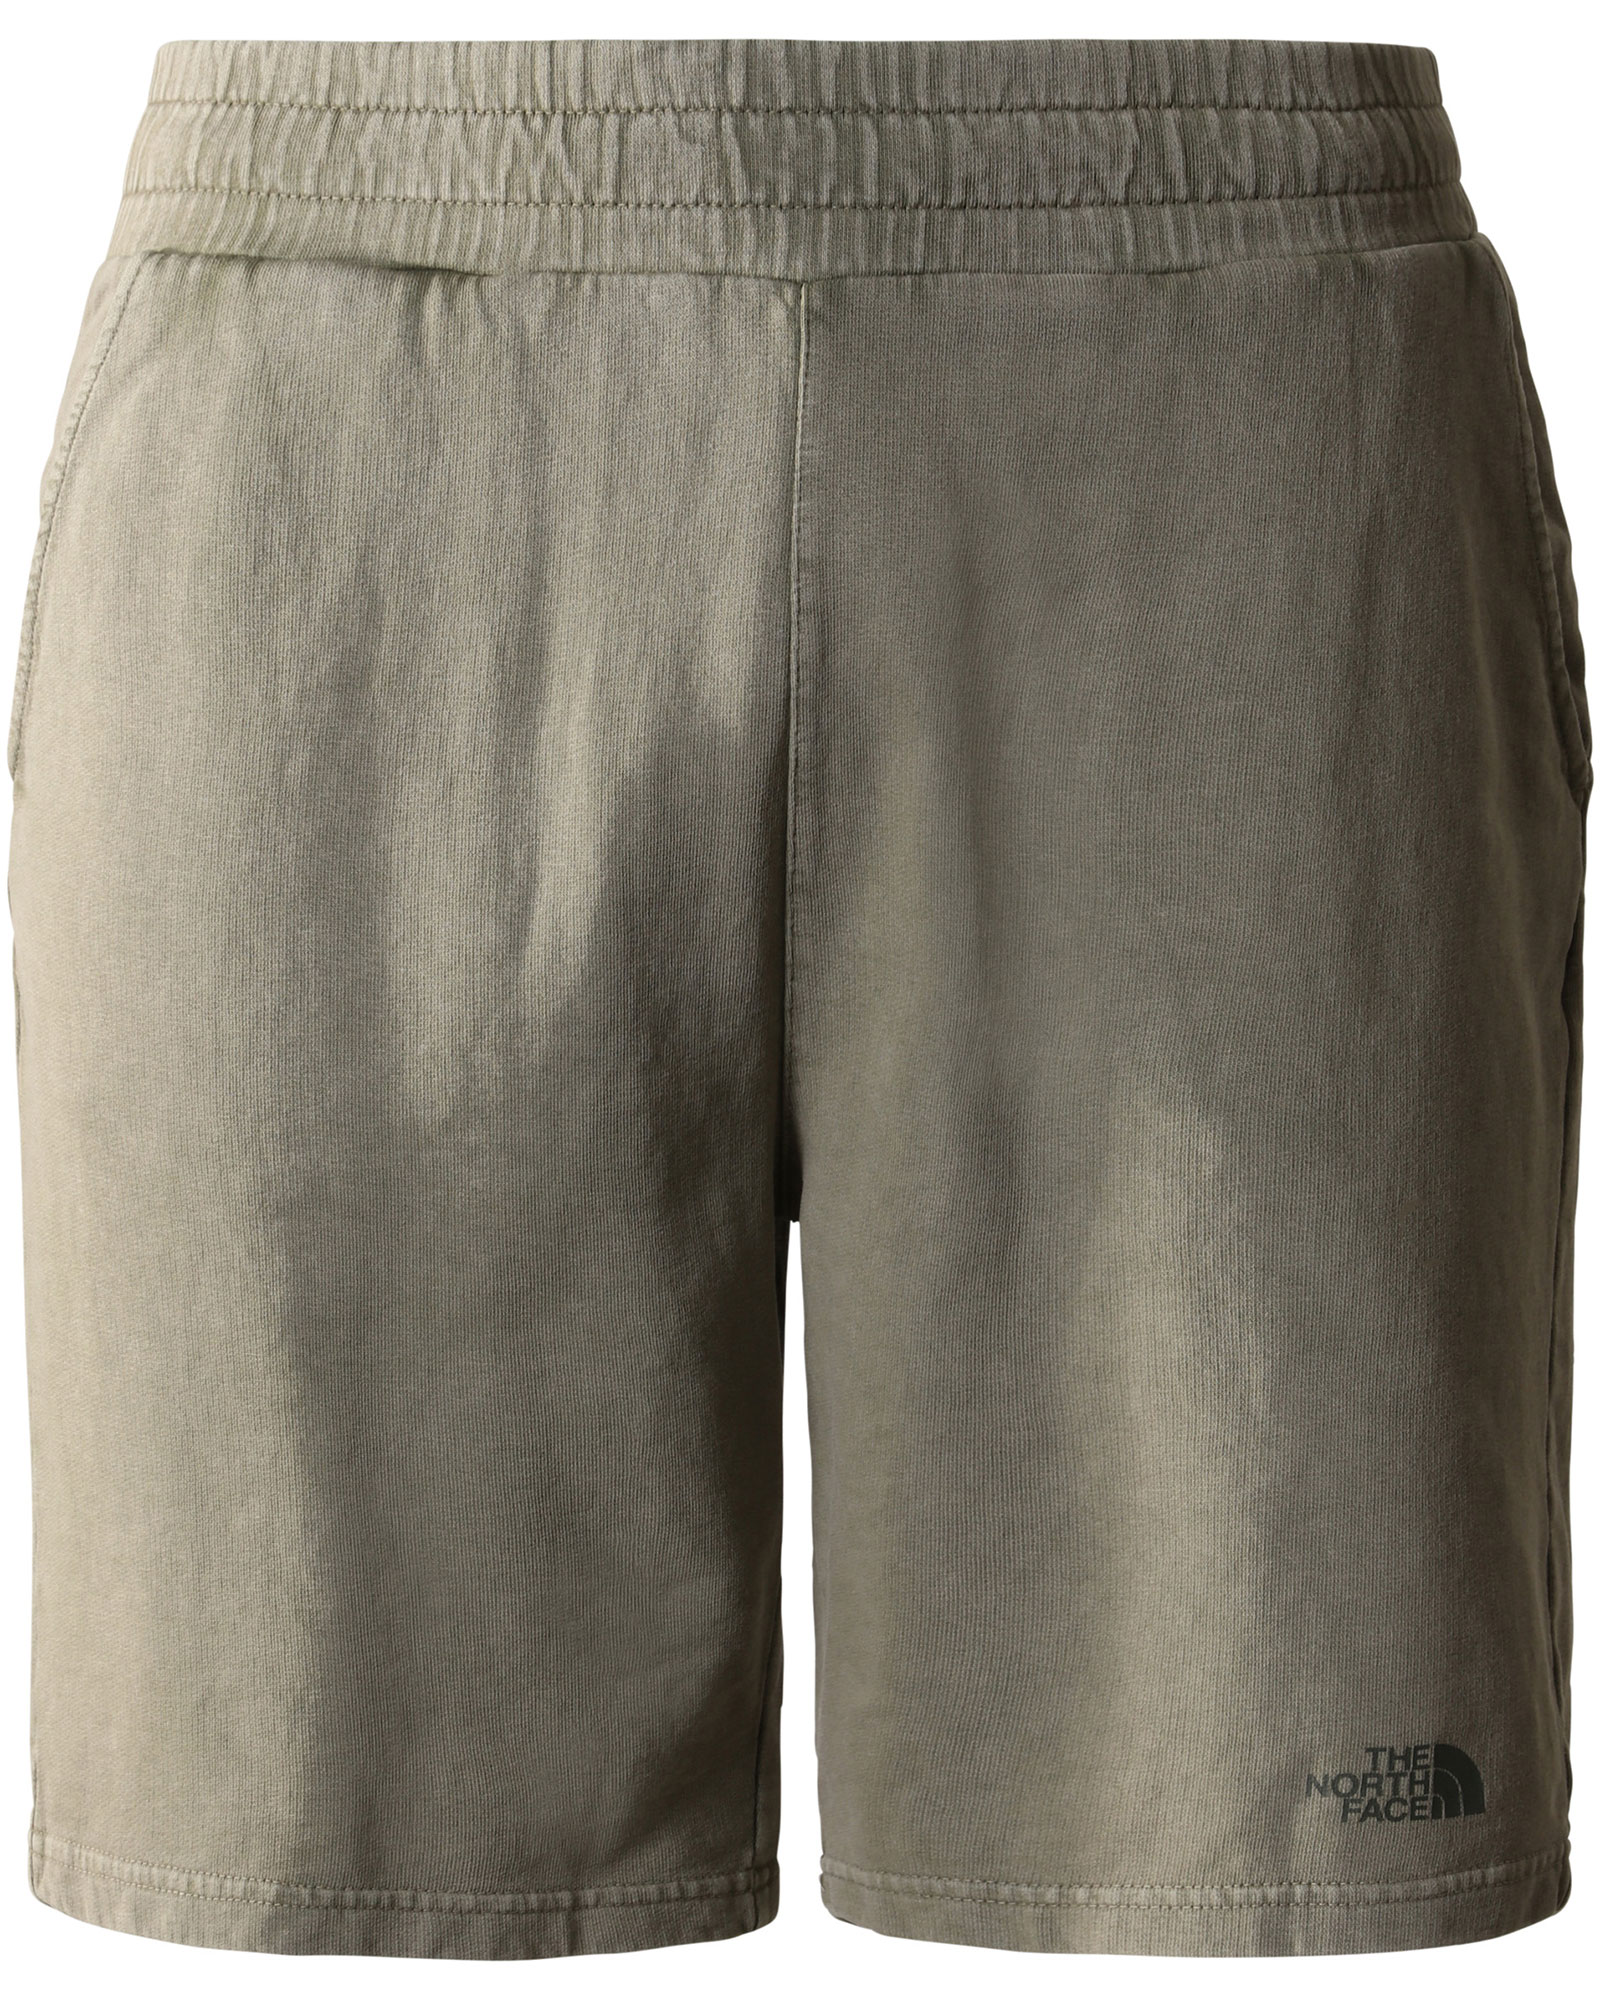 The North Face Men’s Heritage Dye Pack Shorts - New Taupe Green XL